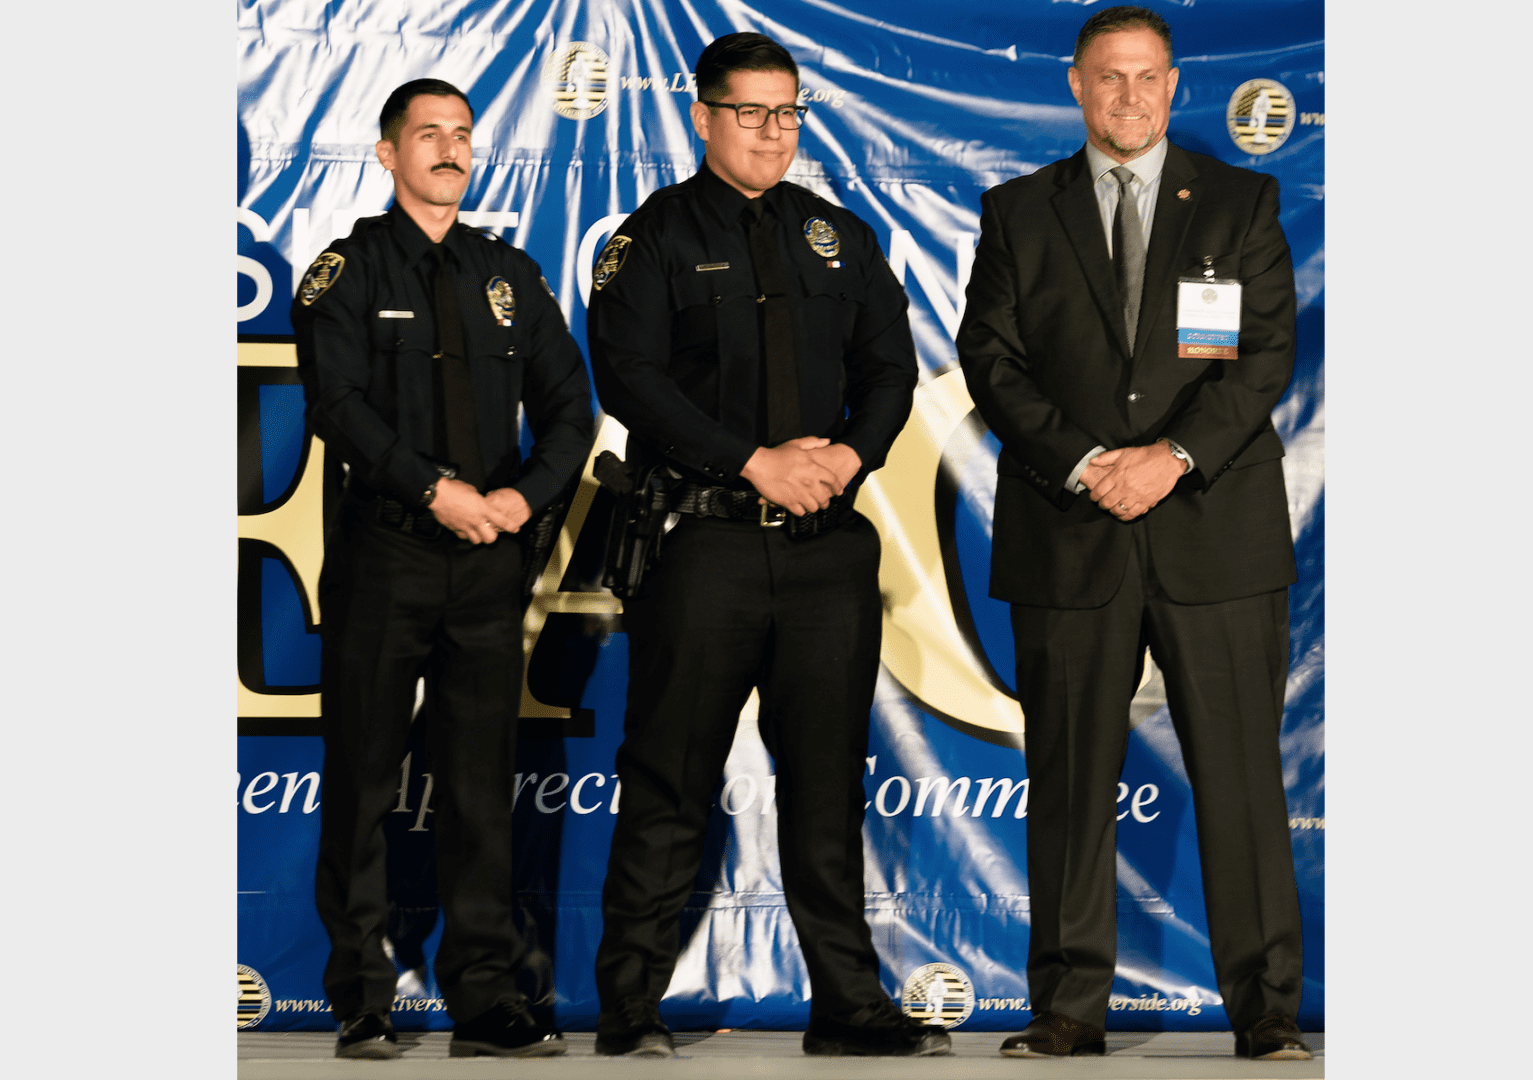 CHP officers get big salary increase as pay rises for CA cops